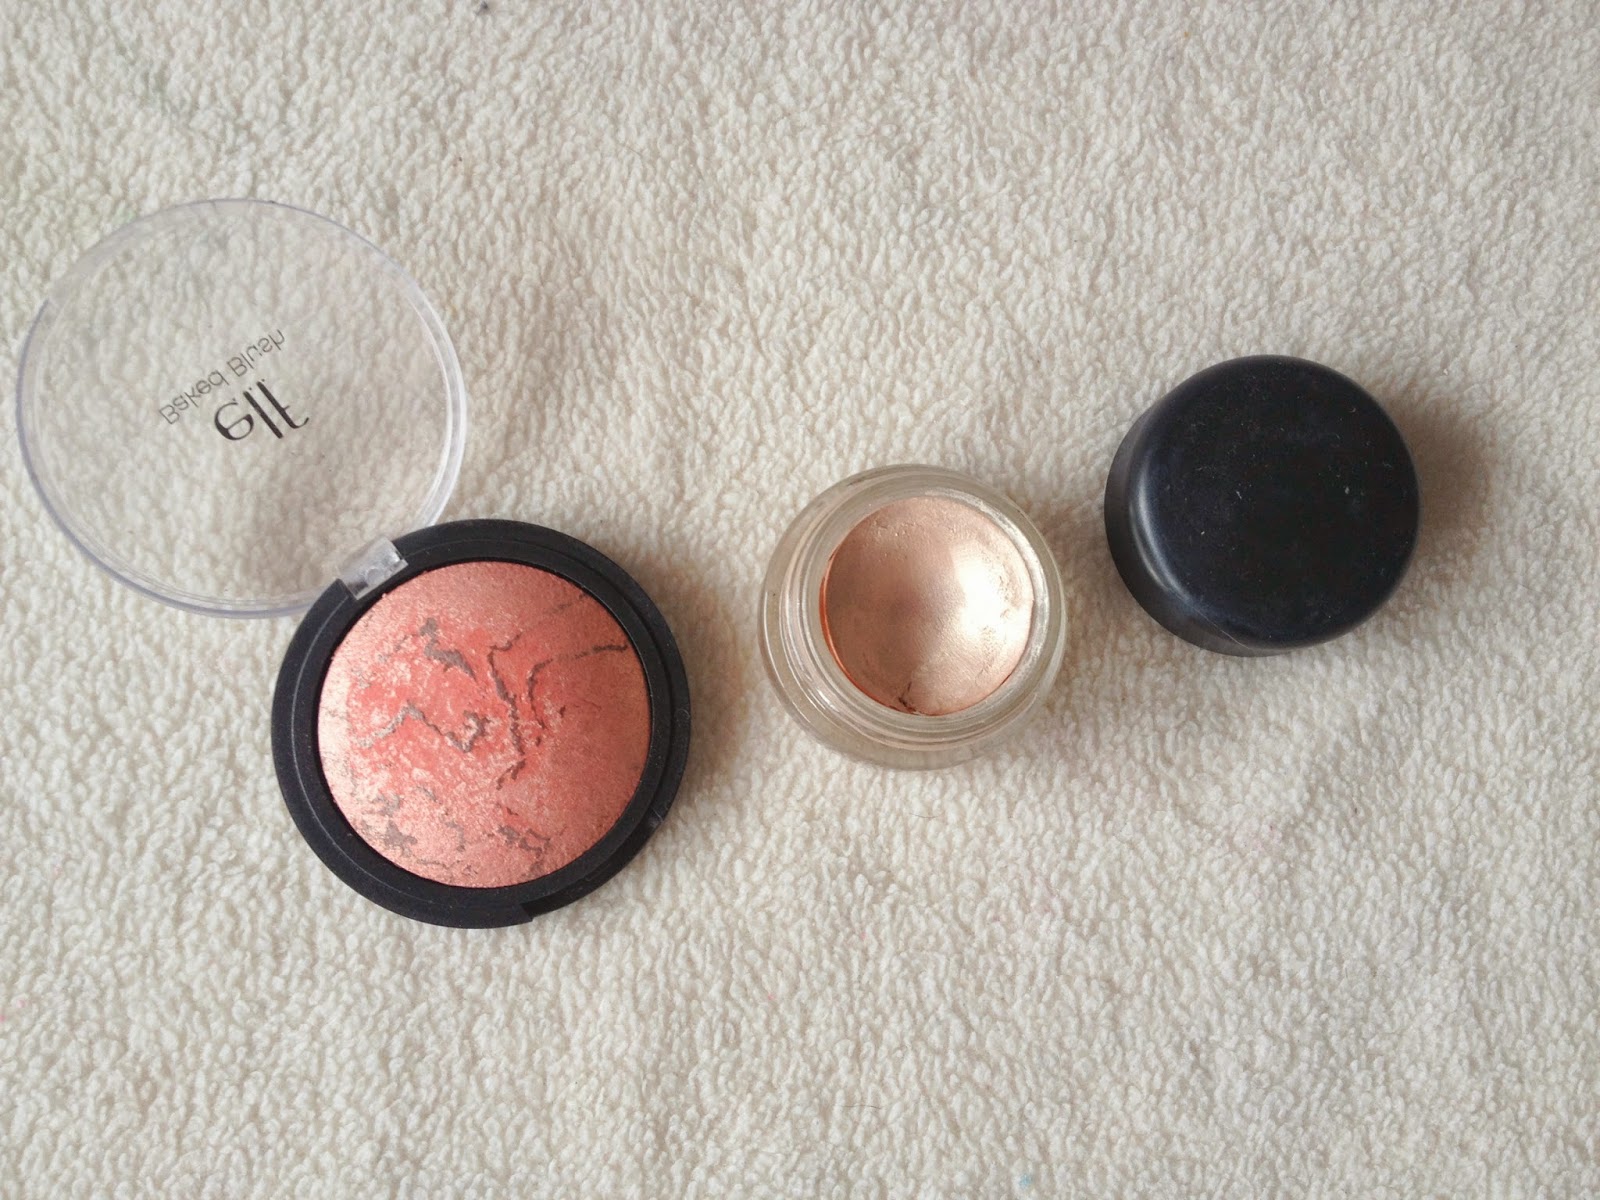 Elf Baked Blush in Peachy Cheeky and MAC Bare Study Paintpot